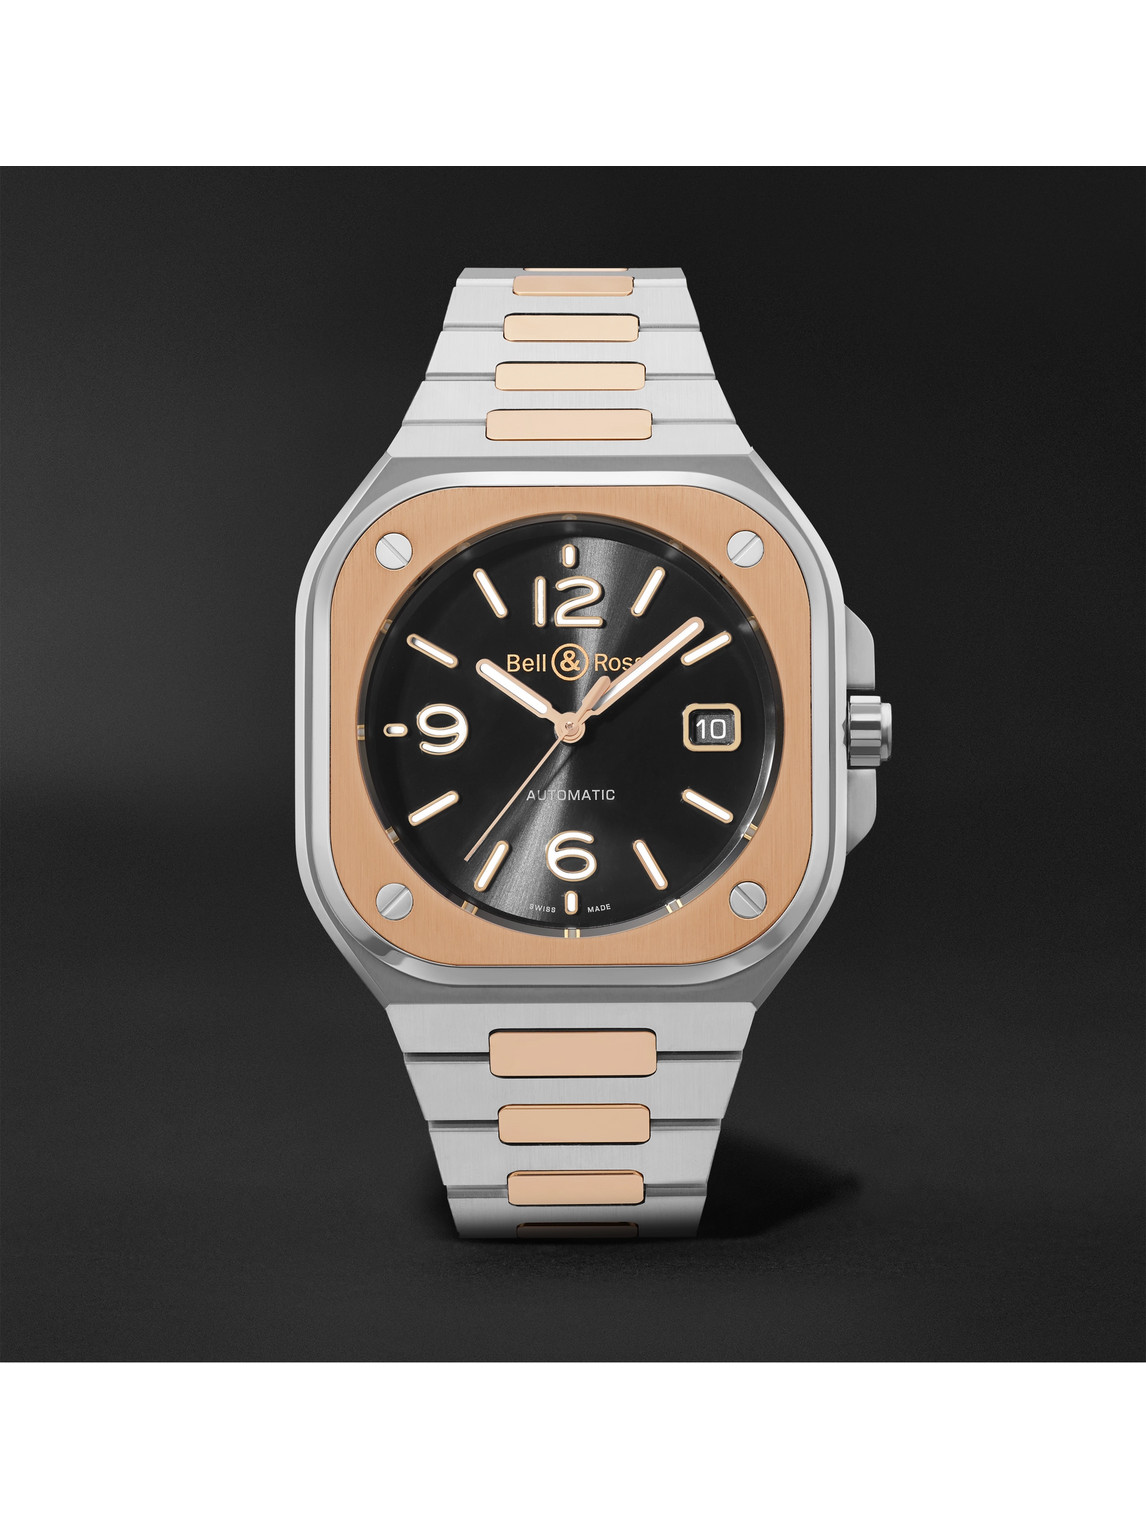 BR 05 Black Steel and Gold Automatic 40mm 18-Karat Rose Gold and Steel Watch, Ref. No. BR05A-BL-STPG/SSG